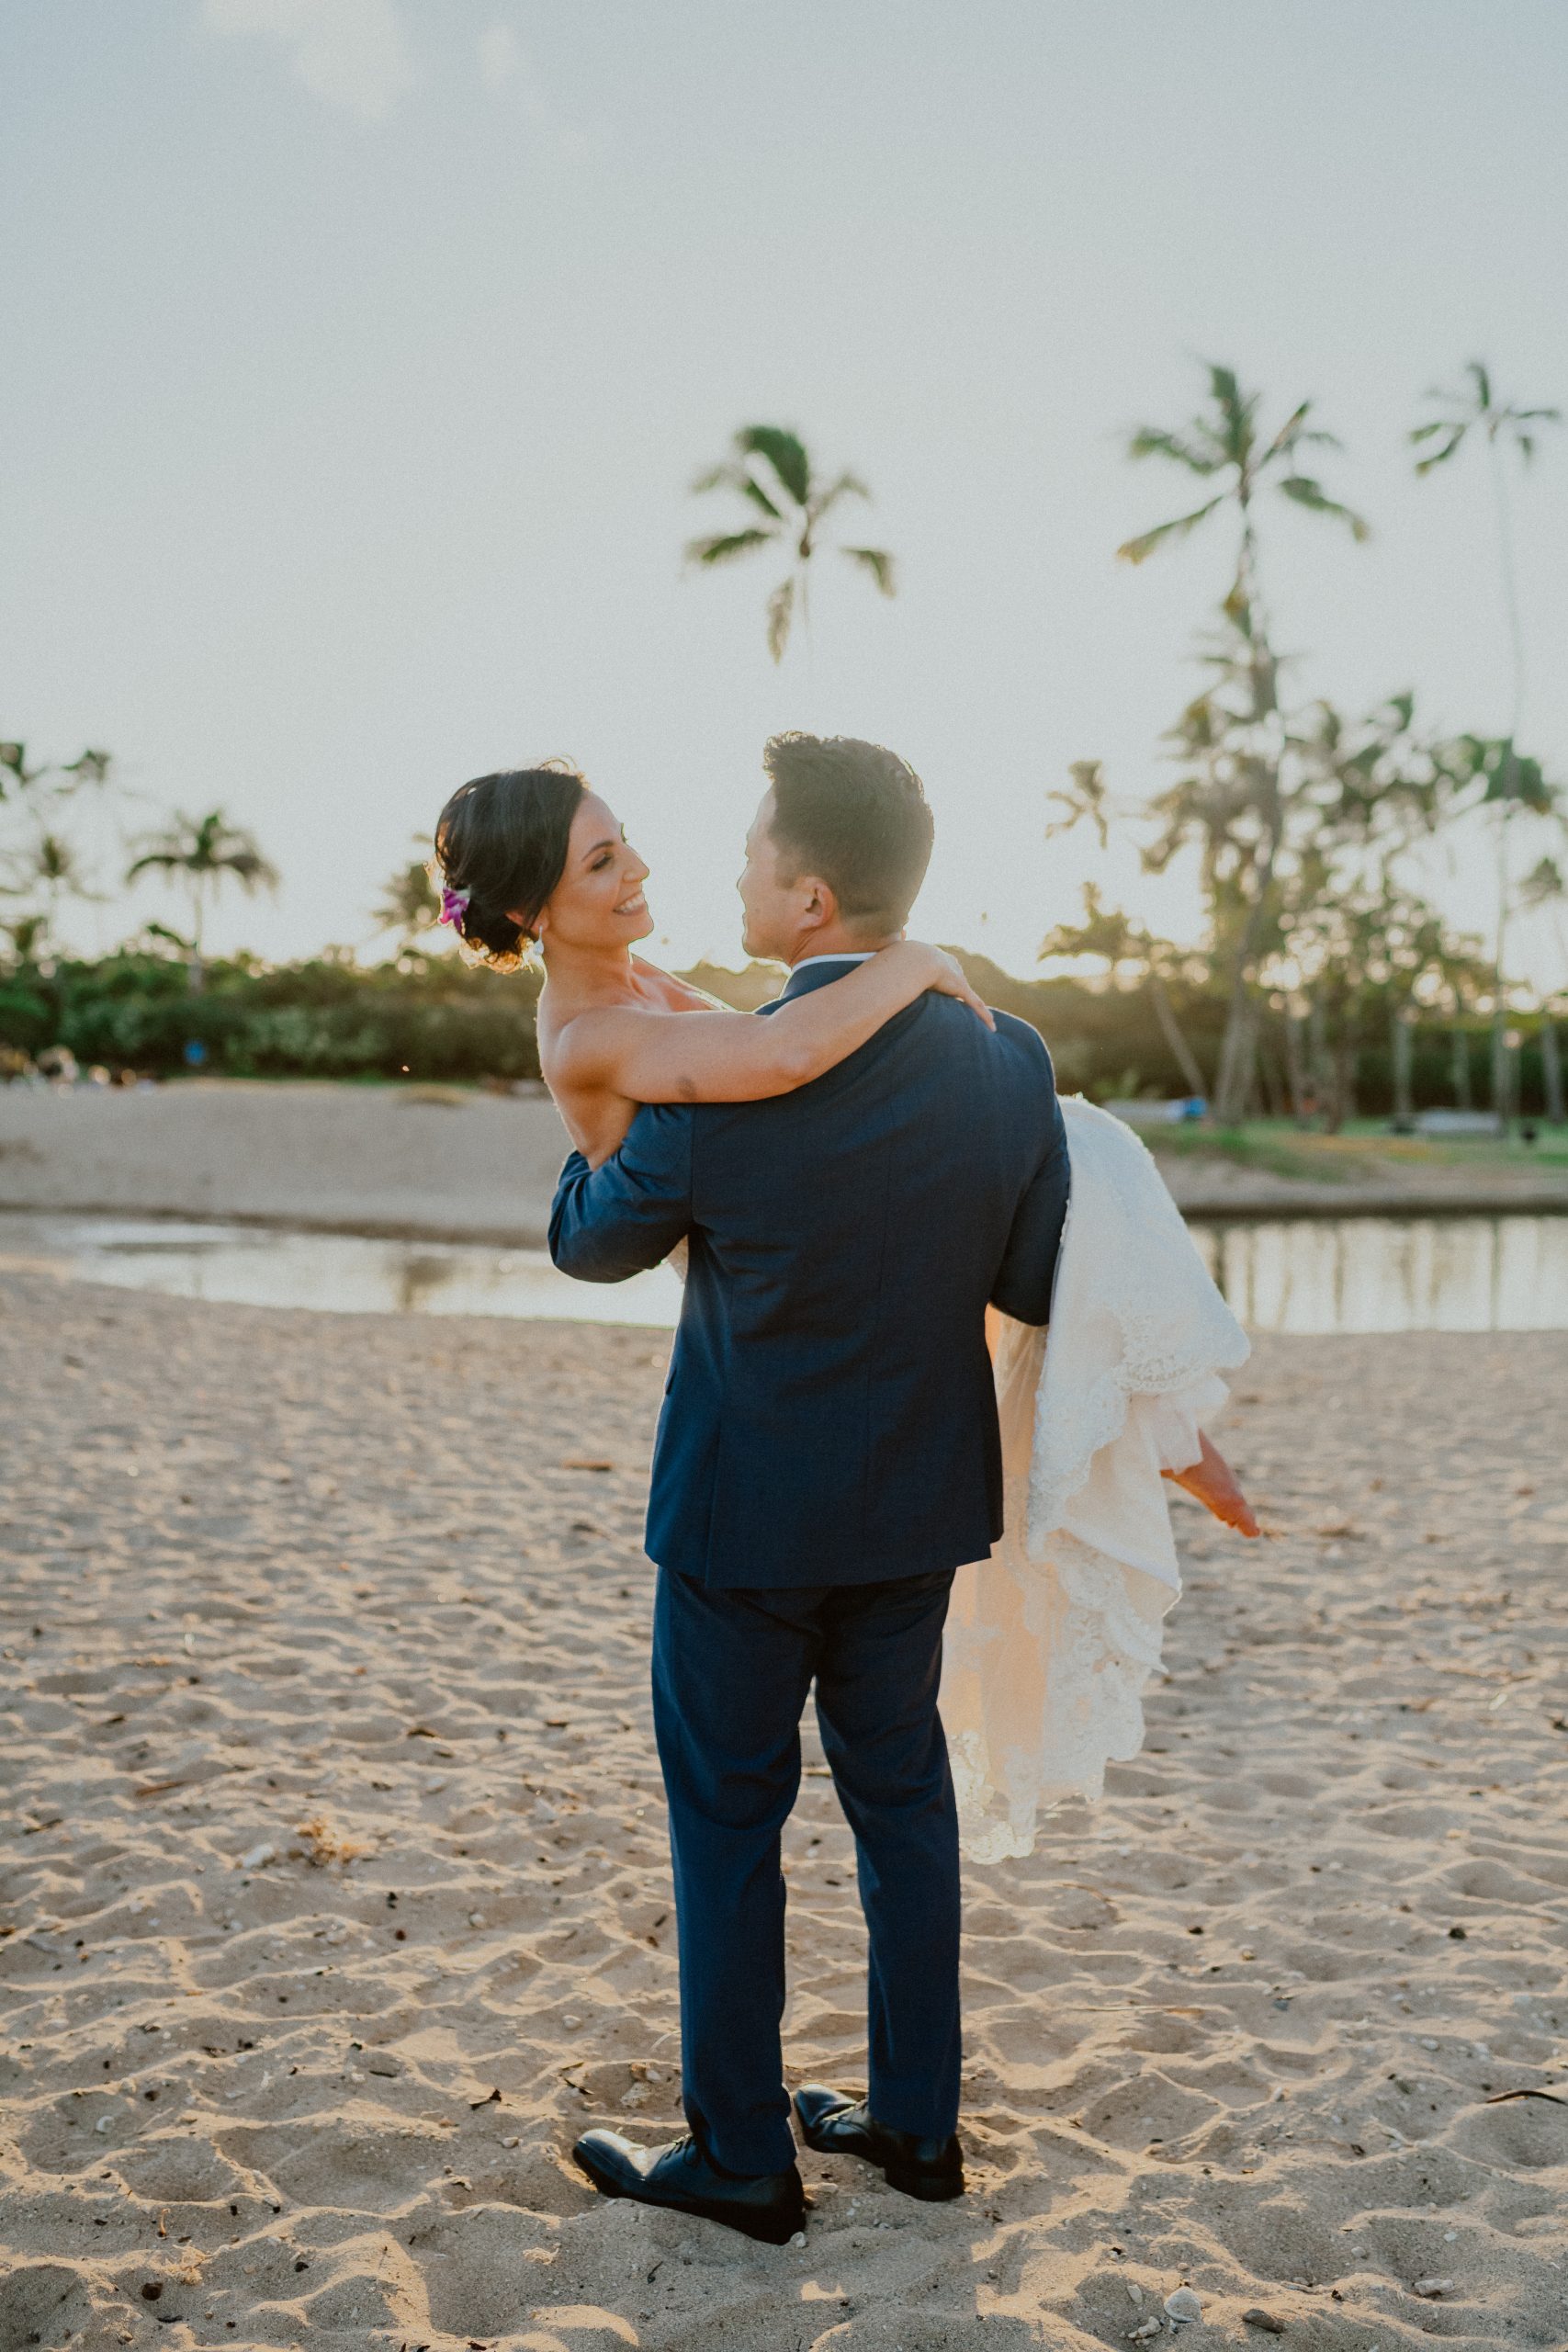 Groom in blue-grey suit style picks up bride as she smiles at him on the Oahu beach after their traditional Hawaii wedding ceremony | Oahu Wedding Photographer, Oahu Elopement Photographer, Destination Wedding Photographer, Destination Elopement Photographer, Newlywed moments ideas, Newlywed Photography inspiration, Hawaii Elopement ideas | chelseaabril.com